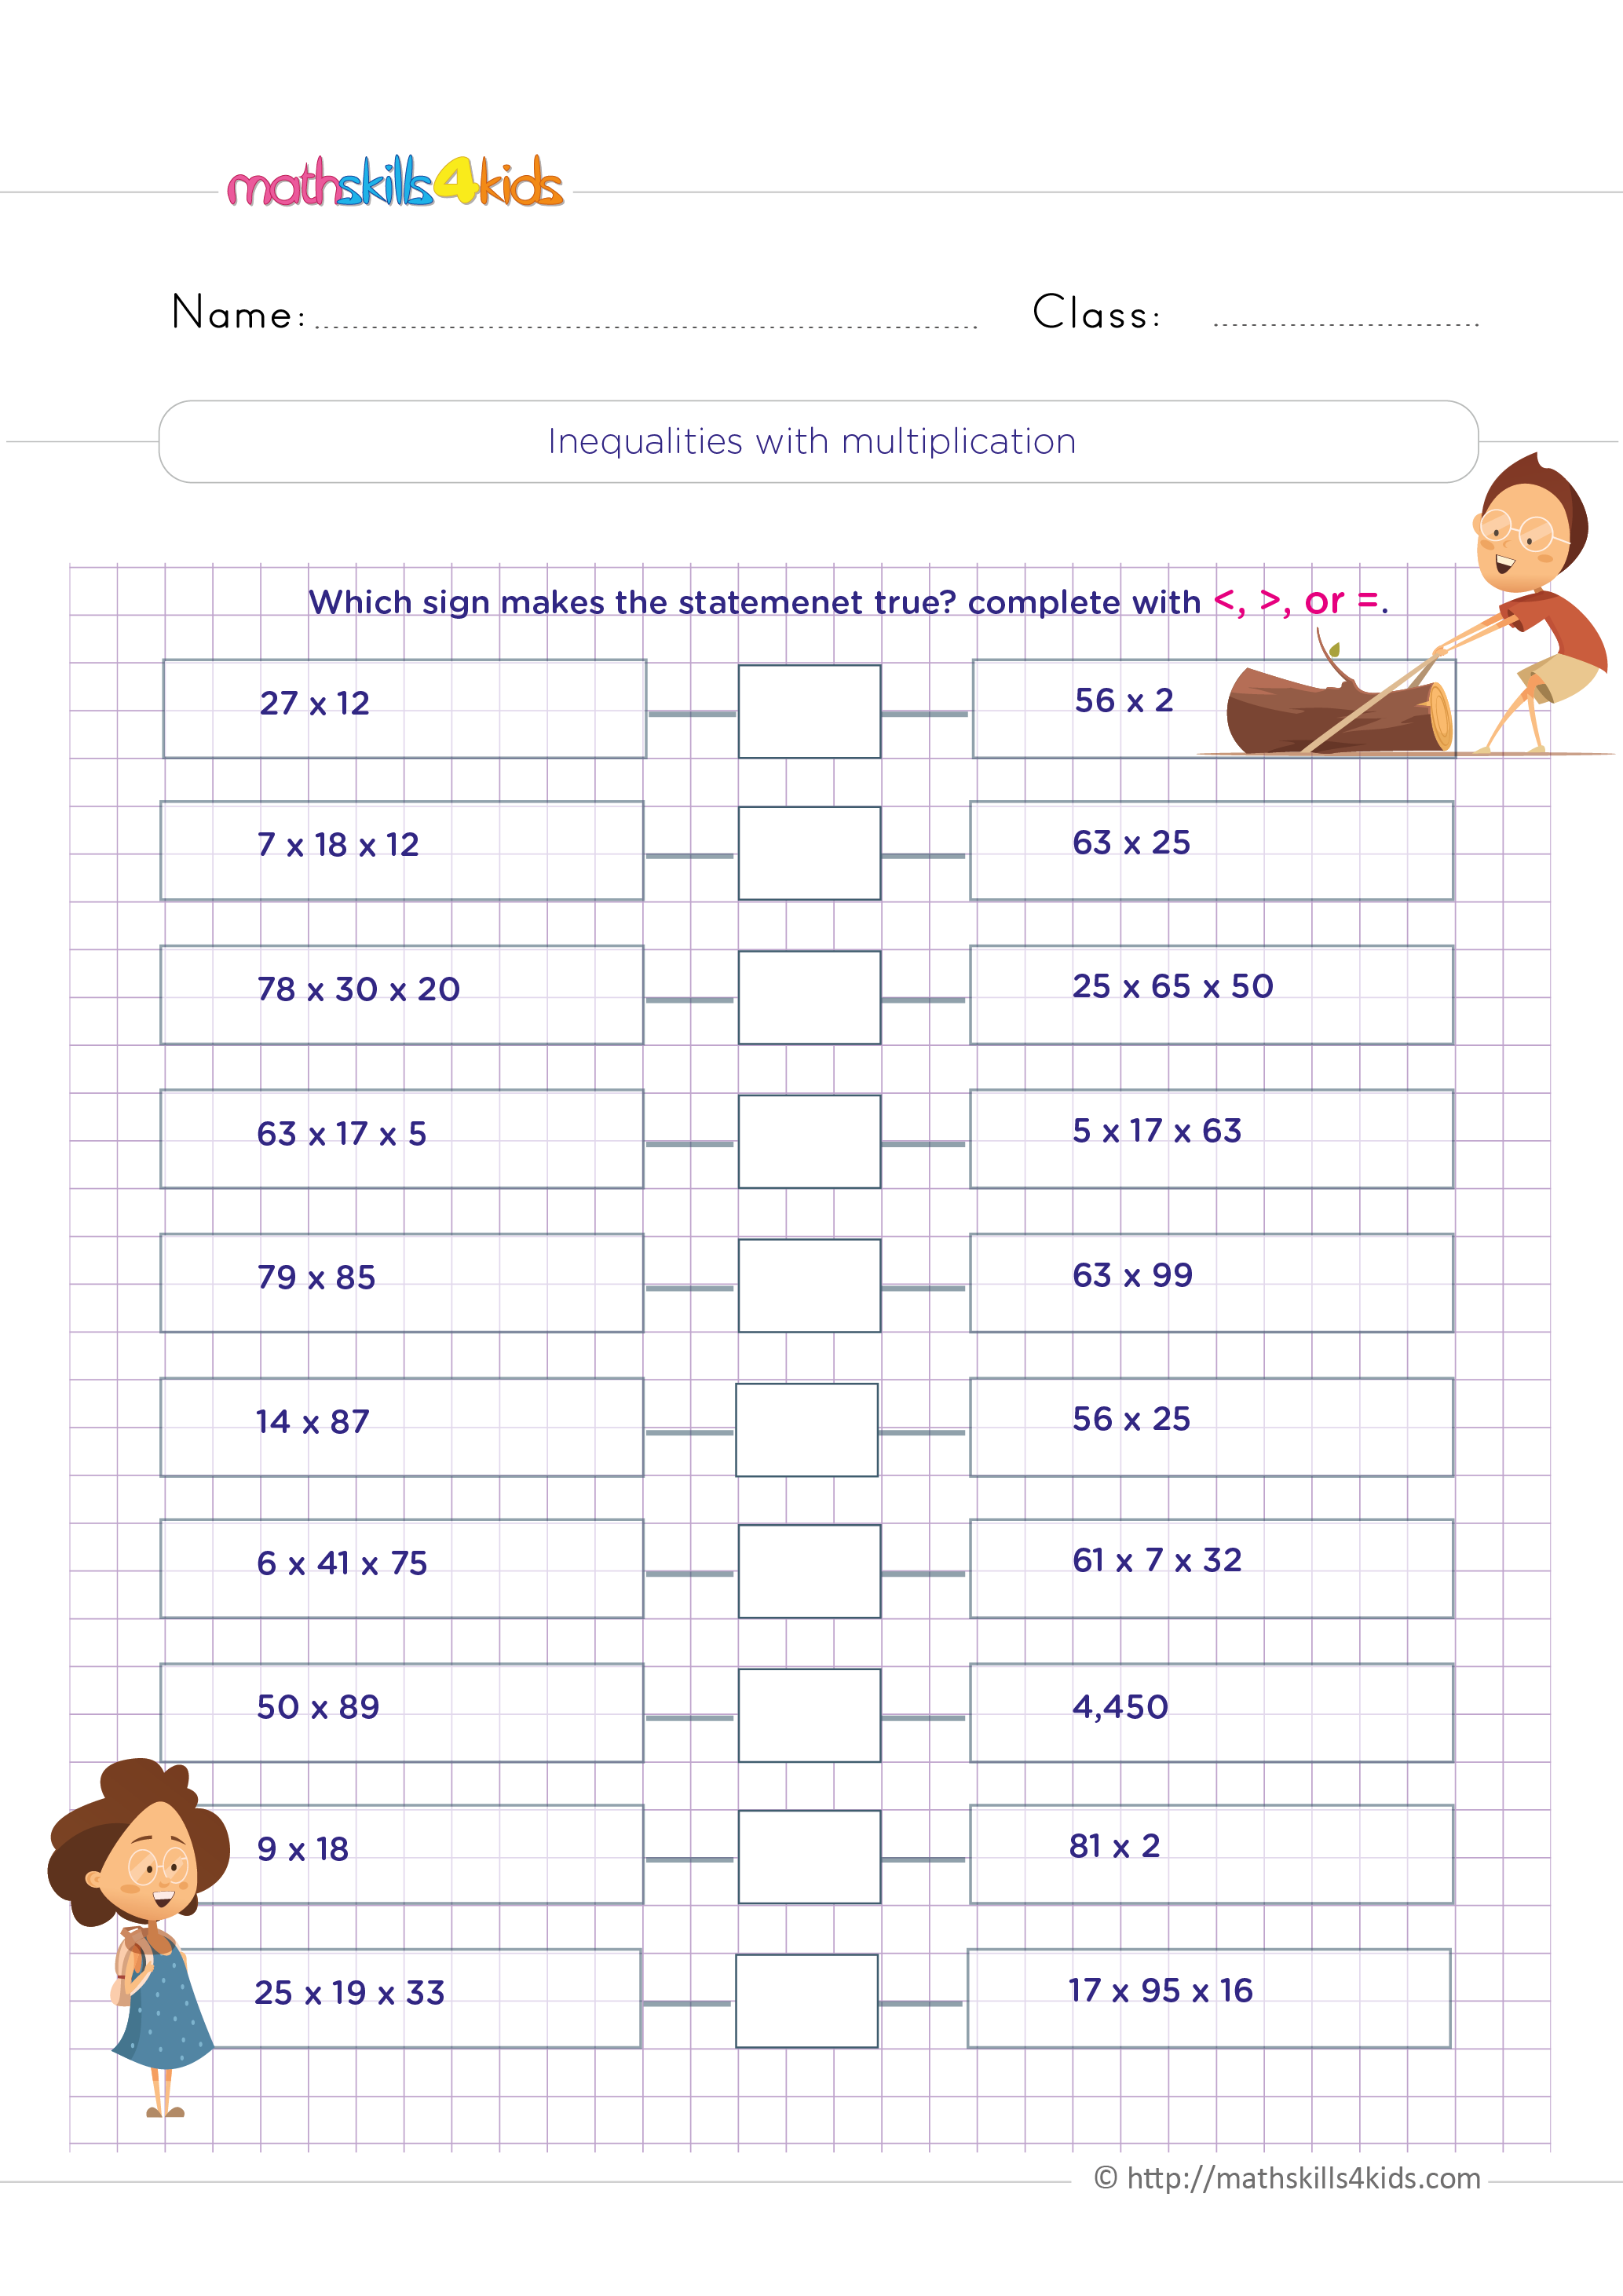 Multiplication Worksheets Grade 4 printable with answers - Practice solving inequalities with multiplication